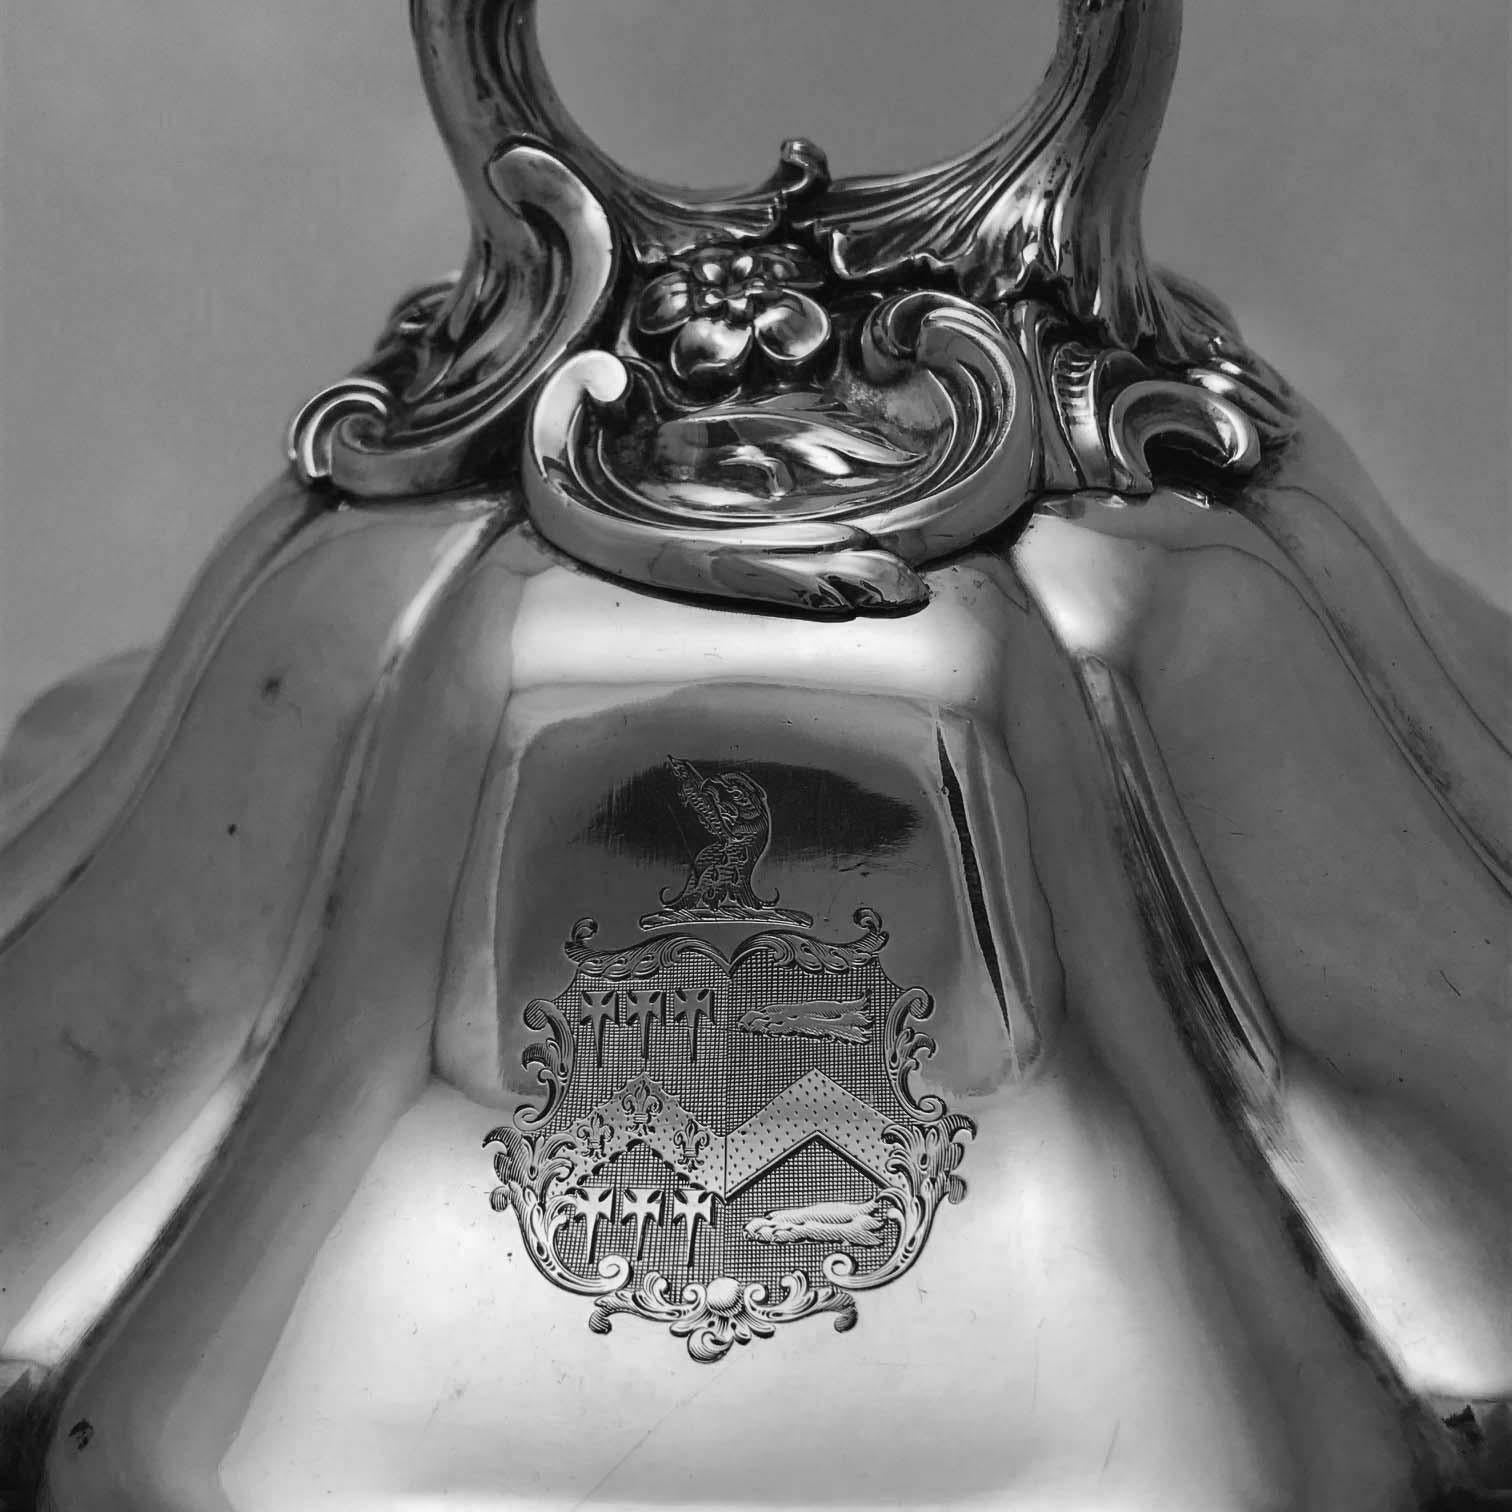 Victorian Covered Plated Chafing Dish with Armorial For Sale 4